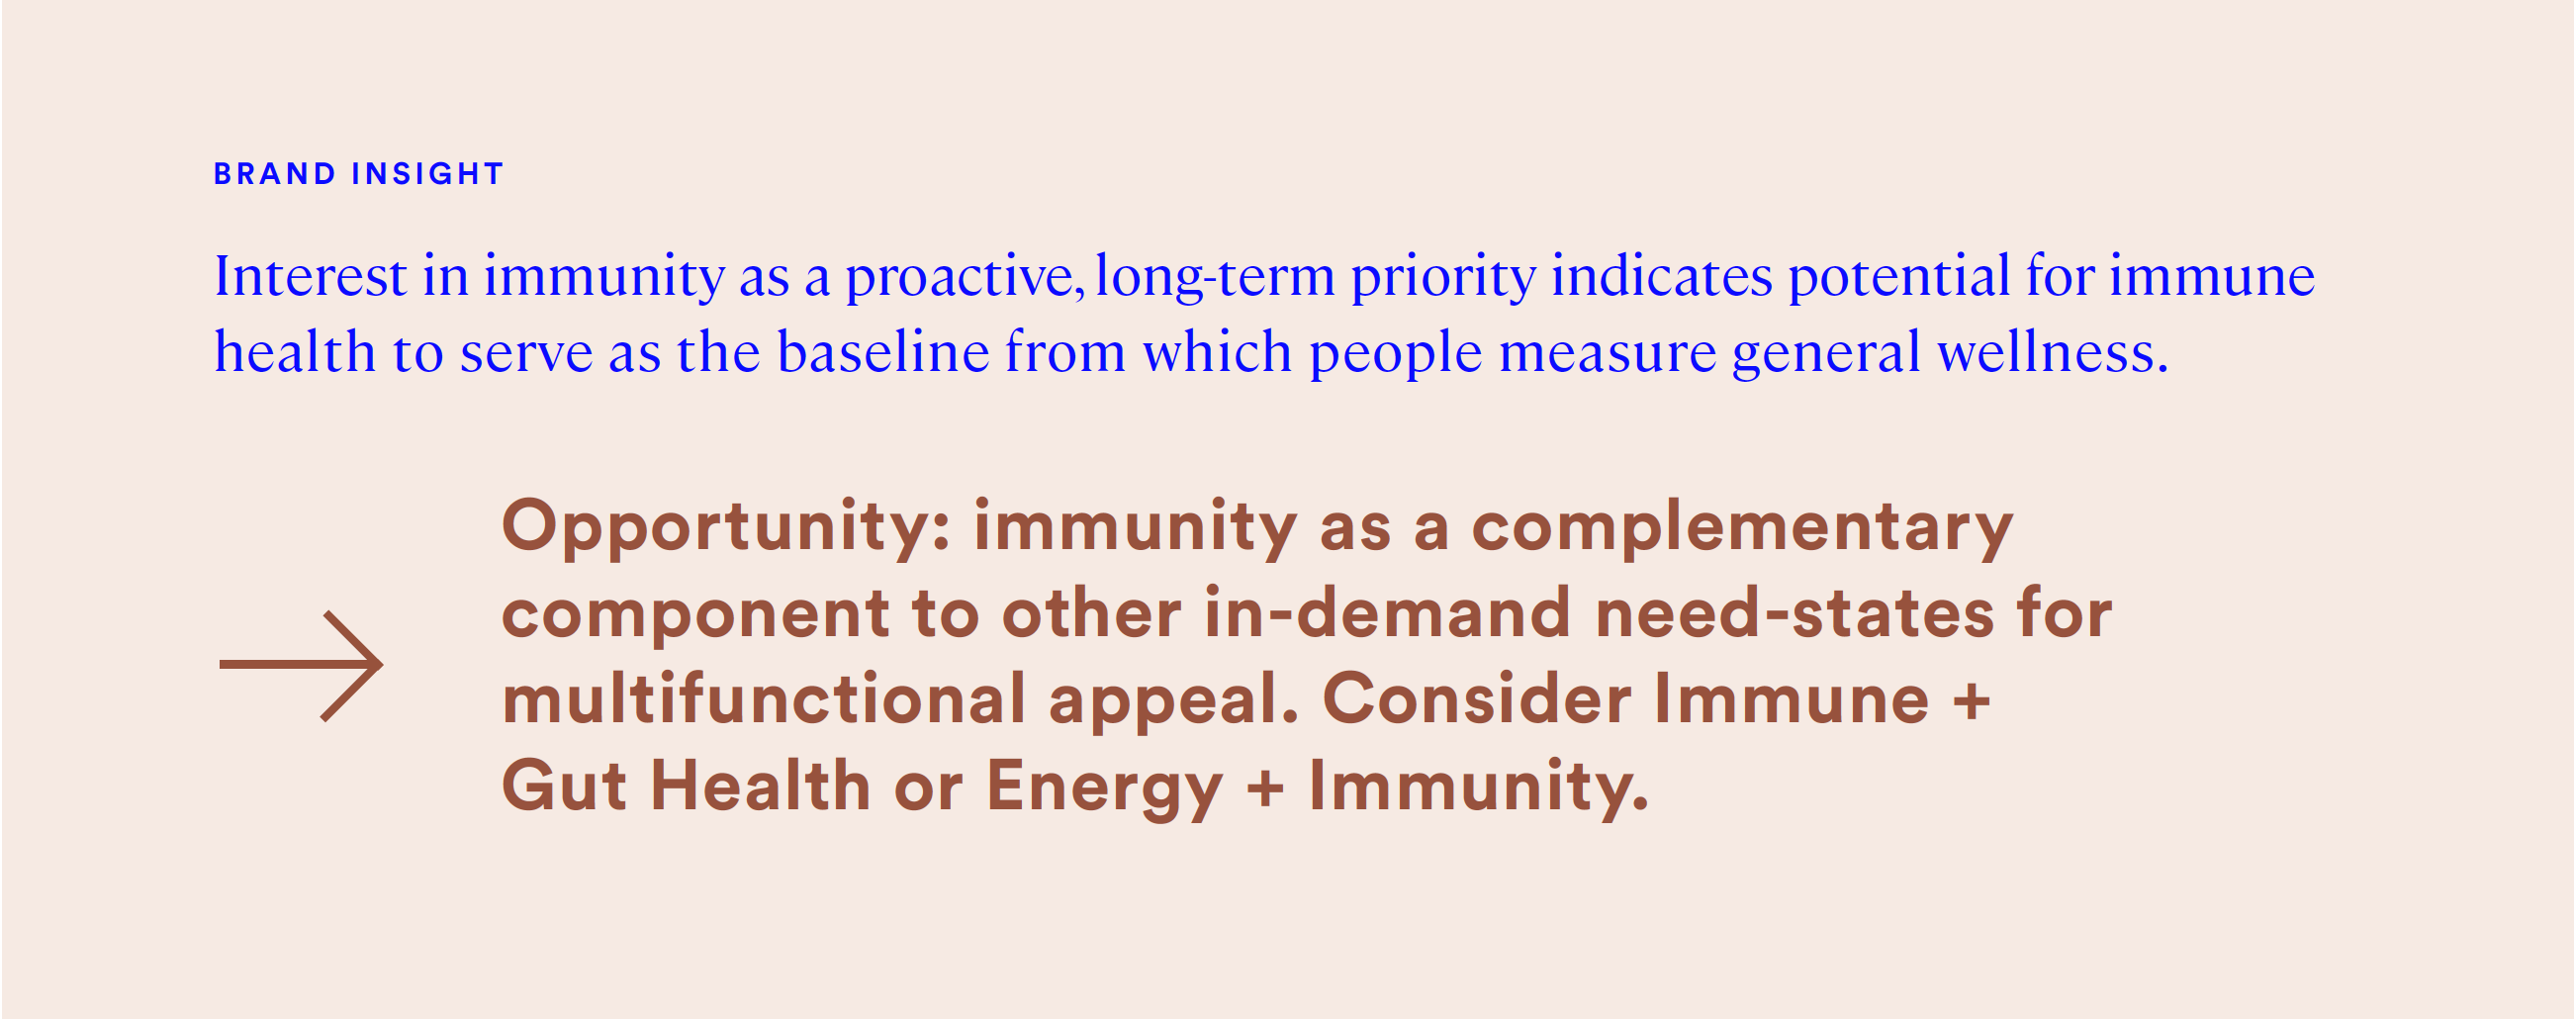 interest in immunity as a proactive, long-term priority indicates potential for immune health to serve as the baseline from which people measure general wellness.